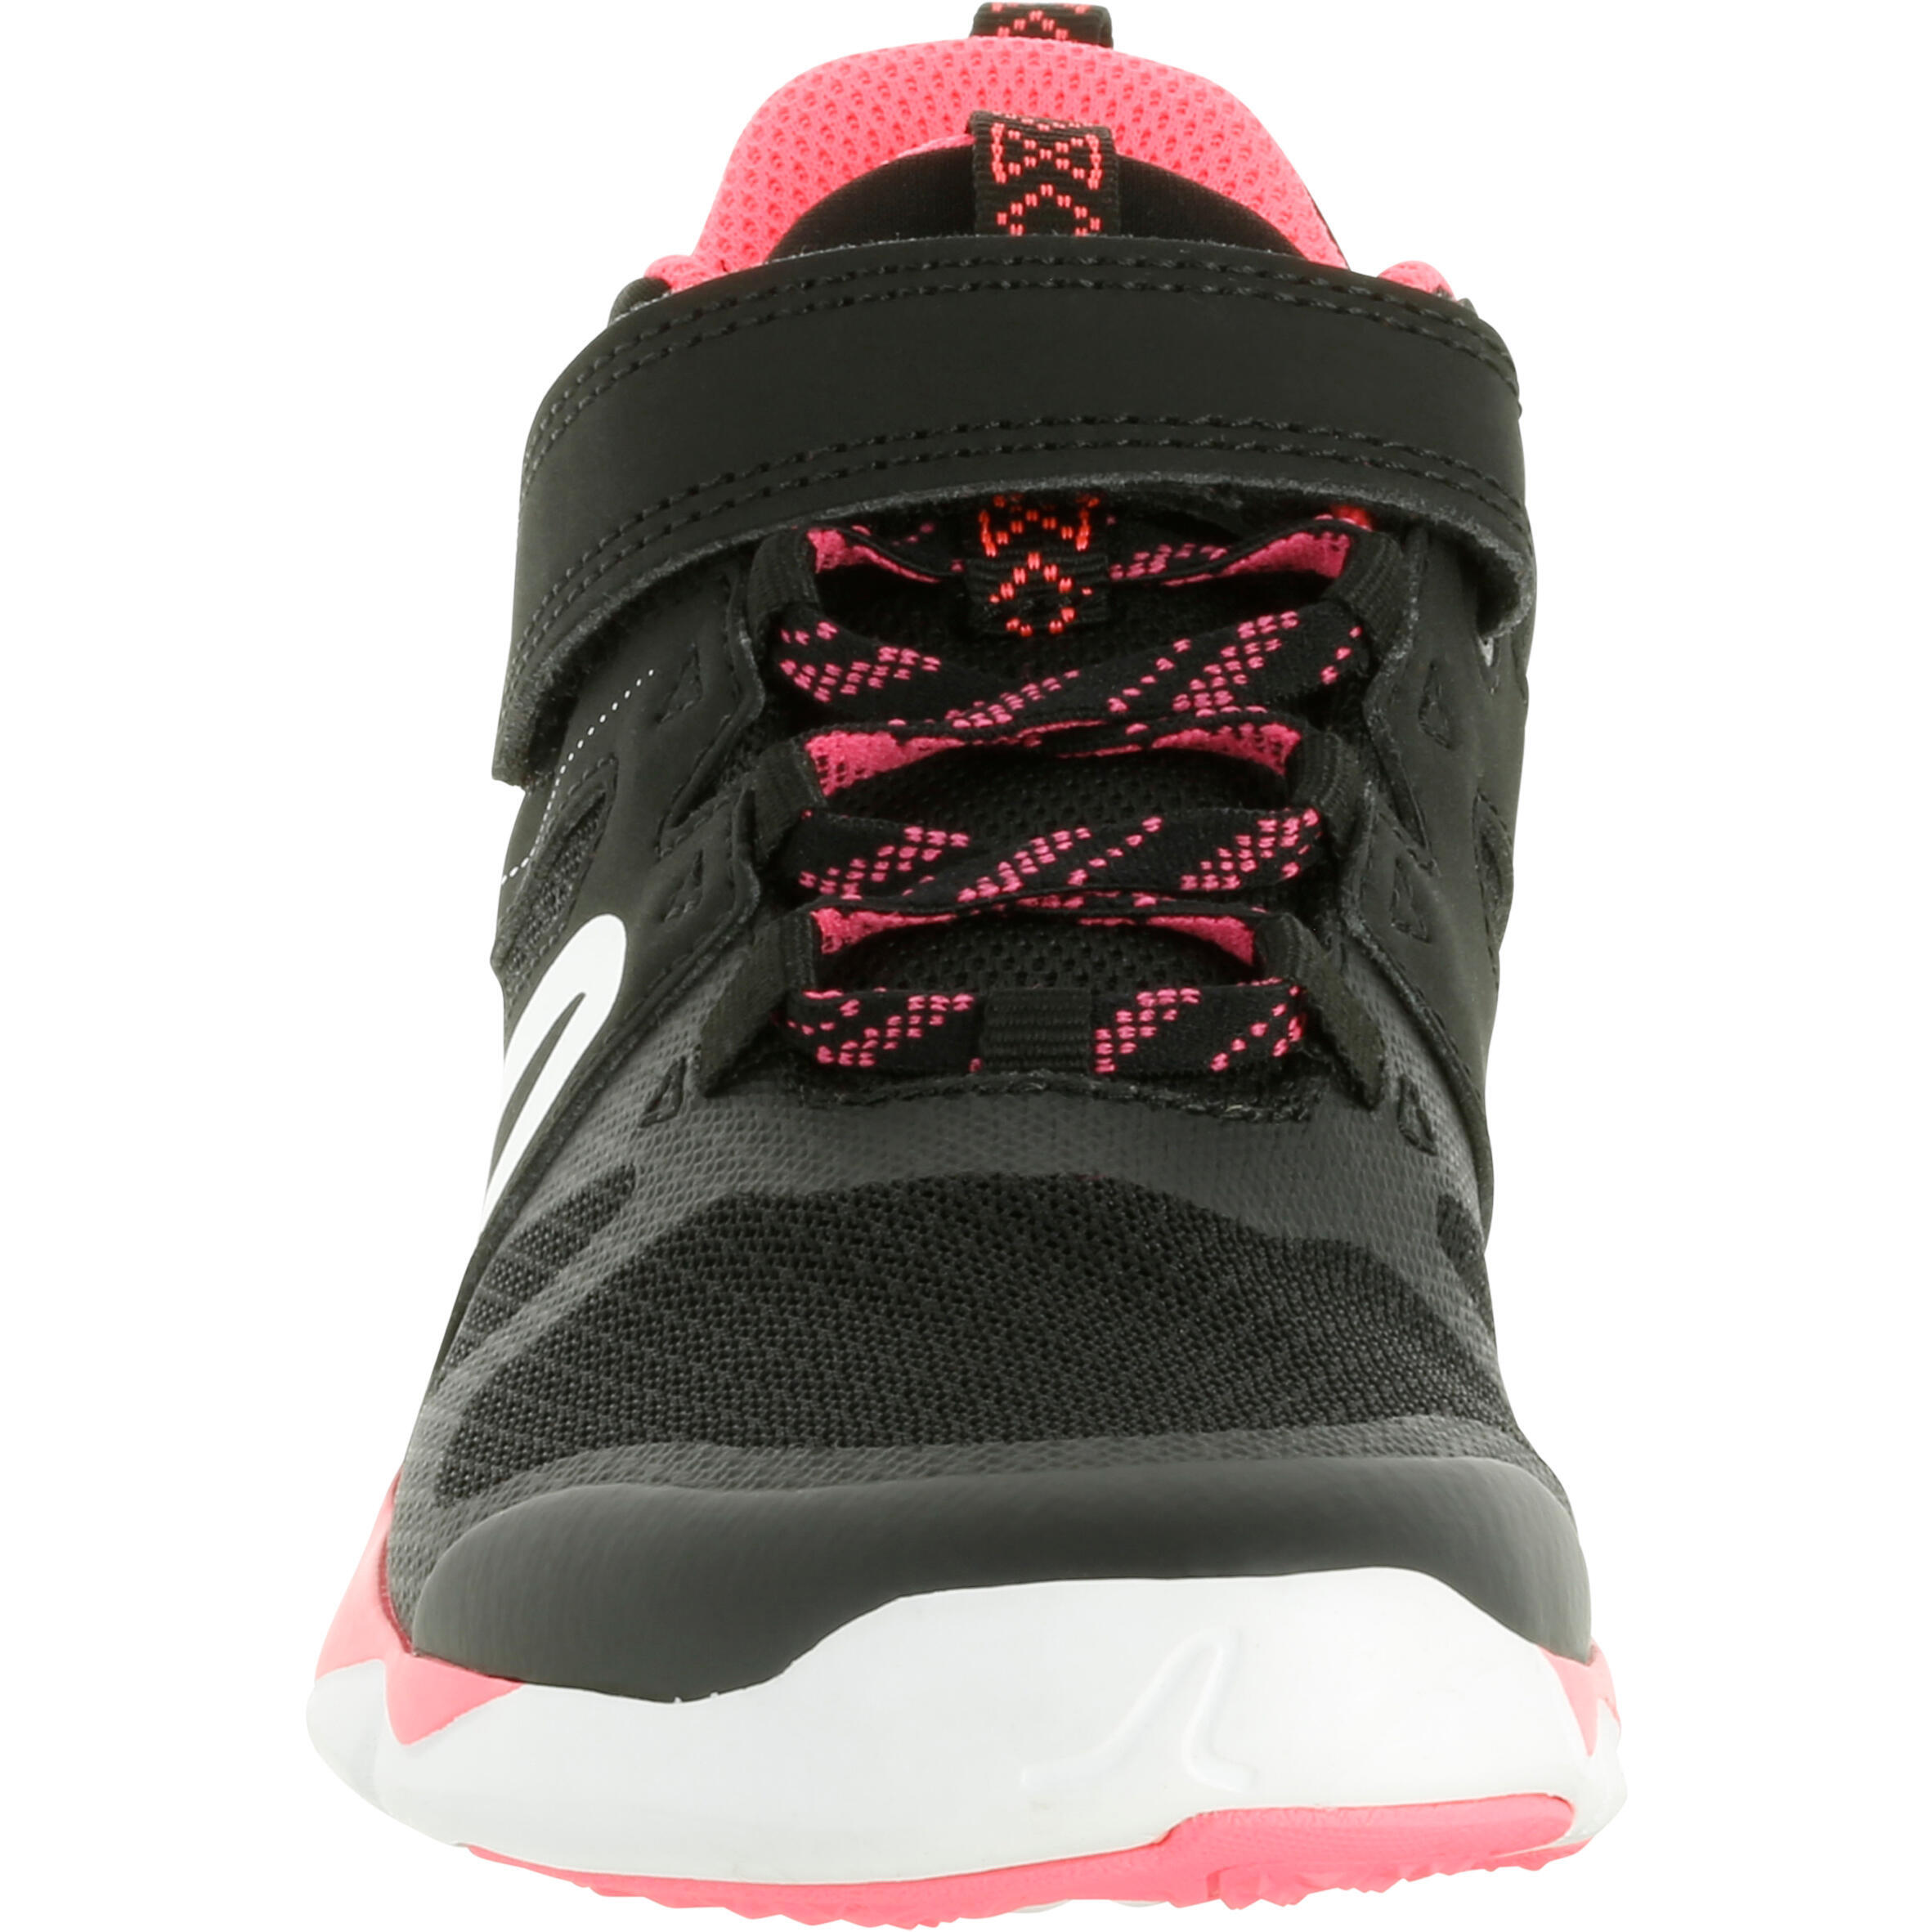 Kids' lightweight and breathable rip-tab trainers, black/pink 11/12